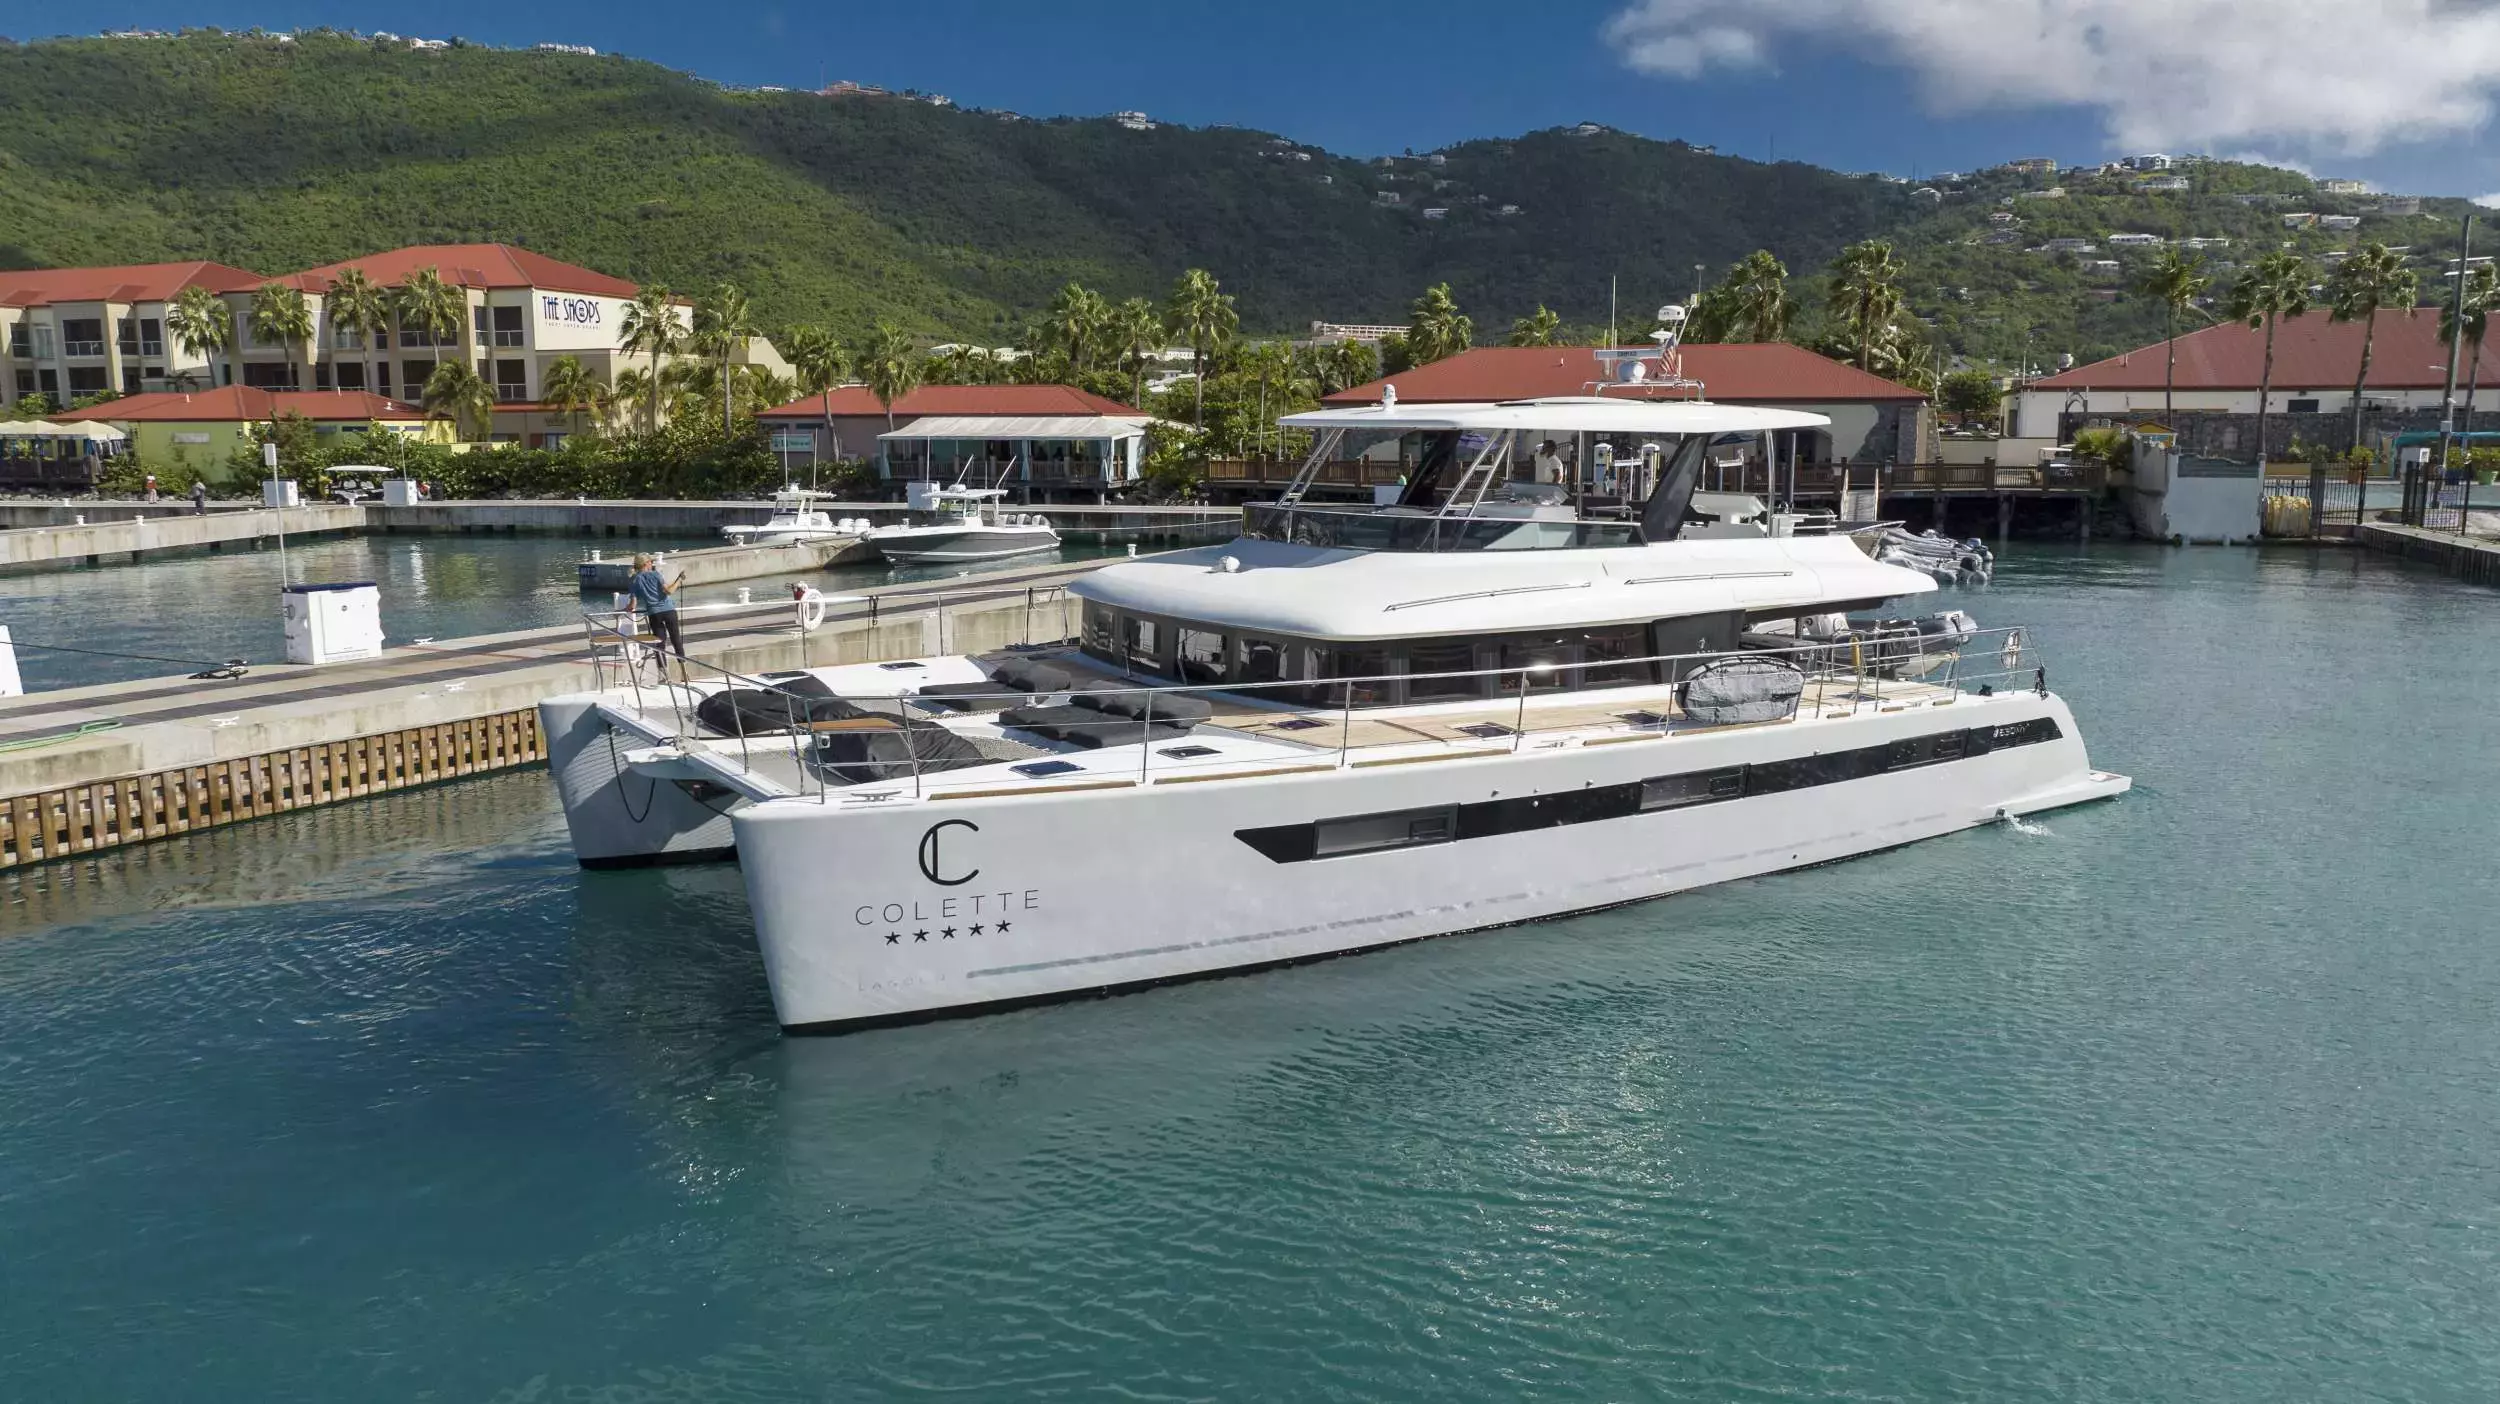 Colette by Lagoon - Top rates for a Rental of a private Power Catamaran in US Virgin Islands